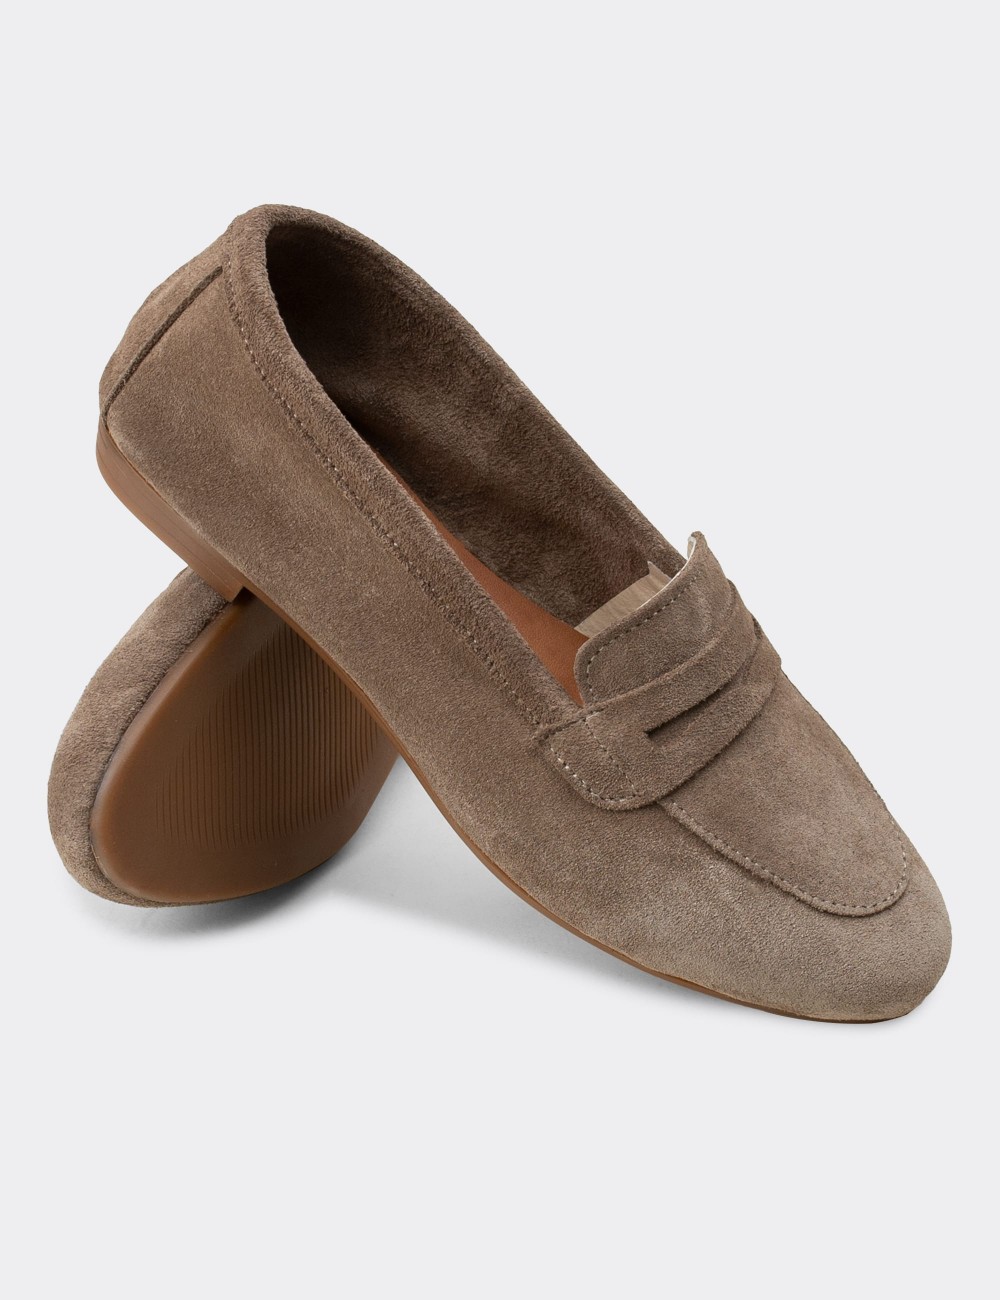 Sandstone Suede Leather Loafers - E3202ZVZNC03